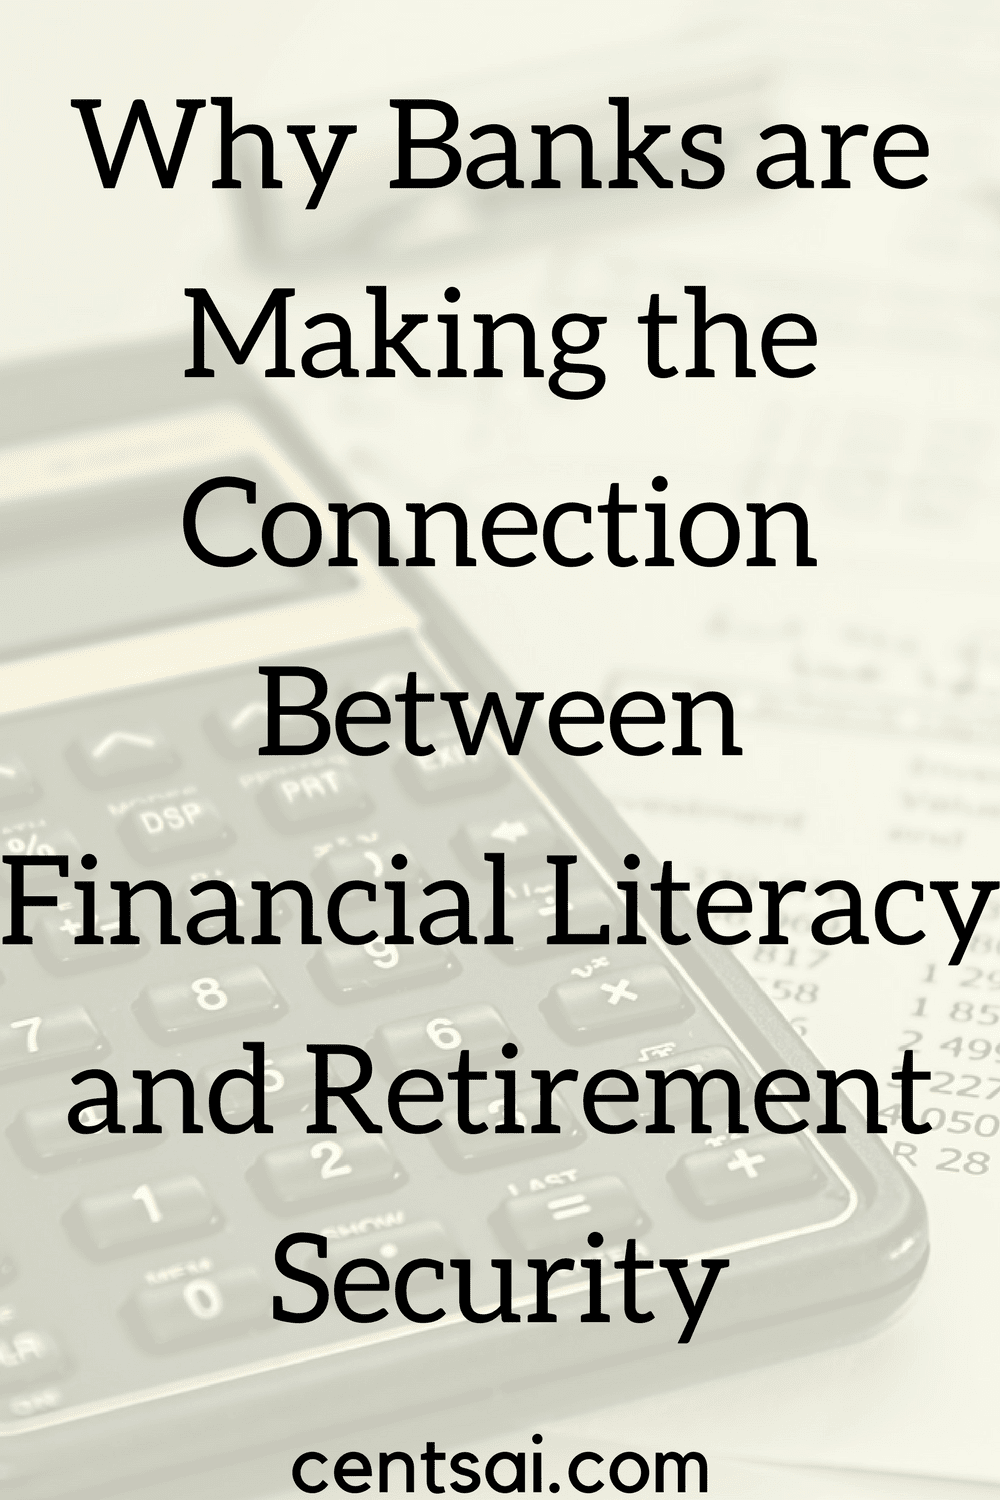 Why Banks are Making the Connection Between Financial Literacy and Retirement Security